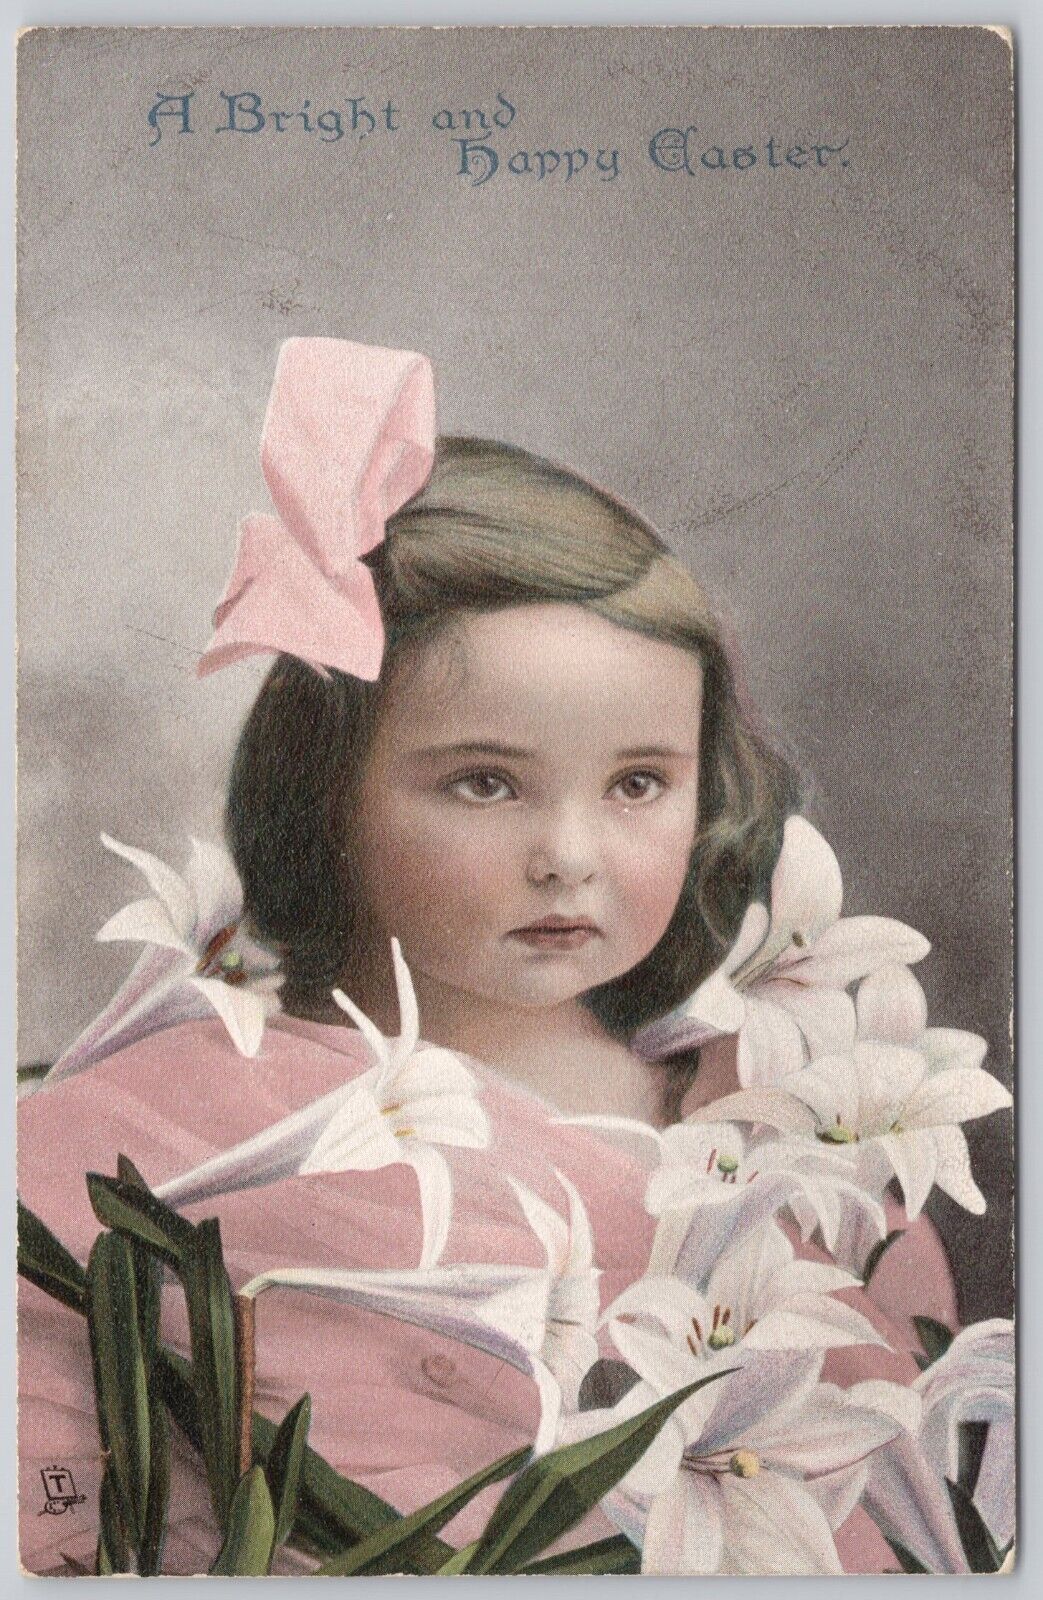 Little Girl with Flowers, Easter Divided Back Postcard